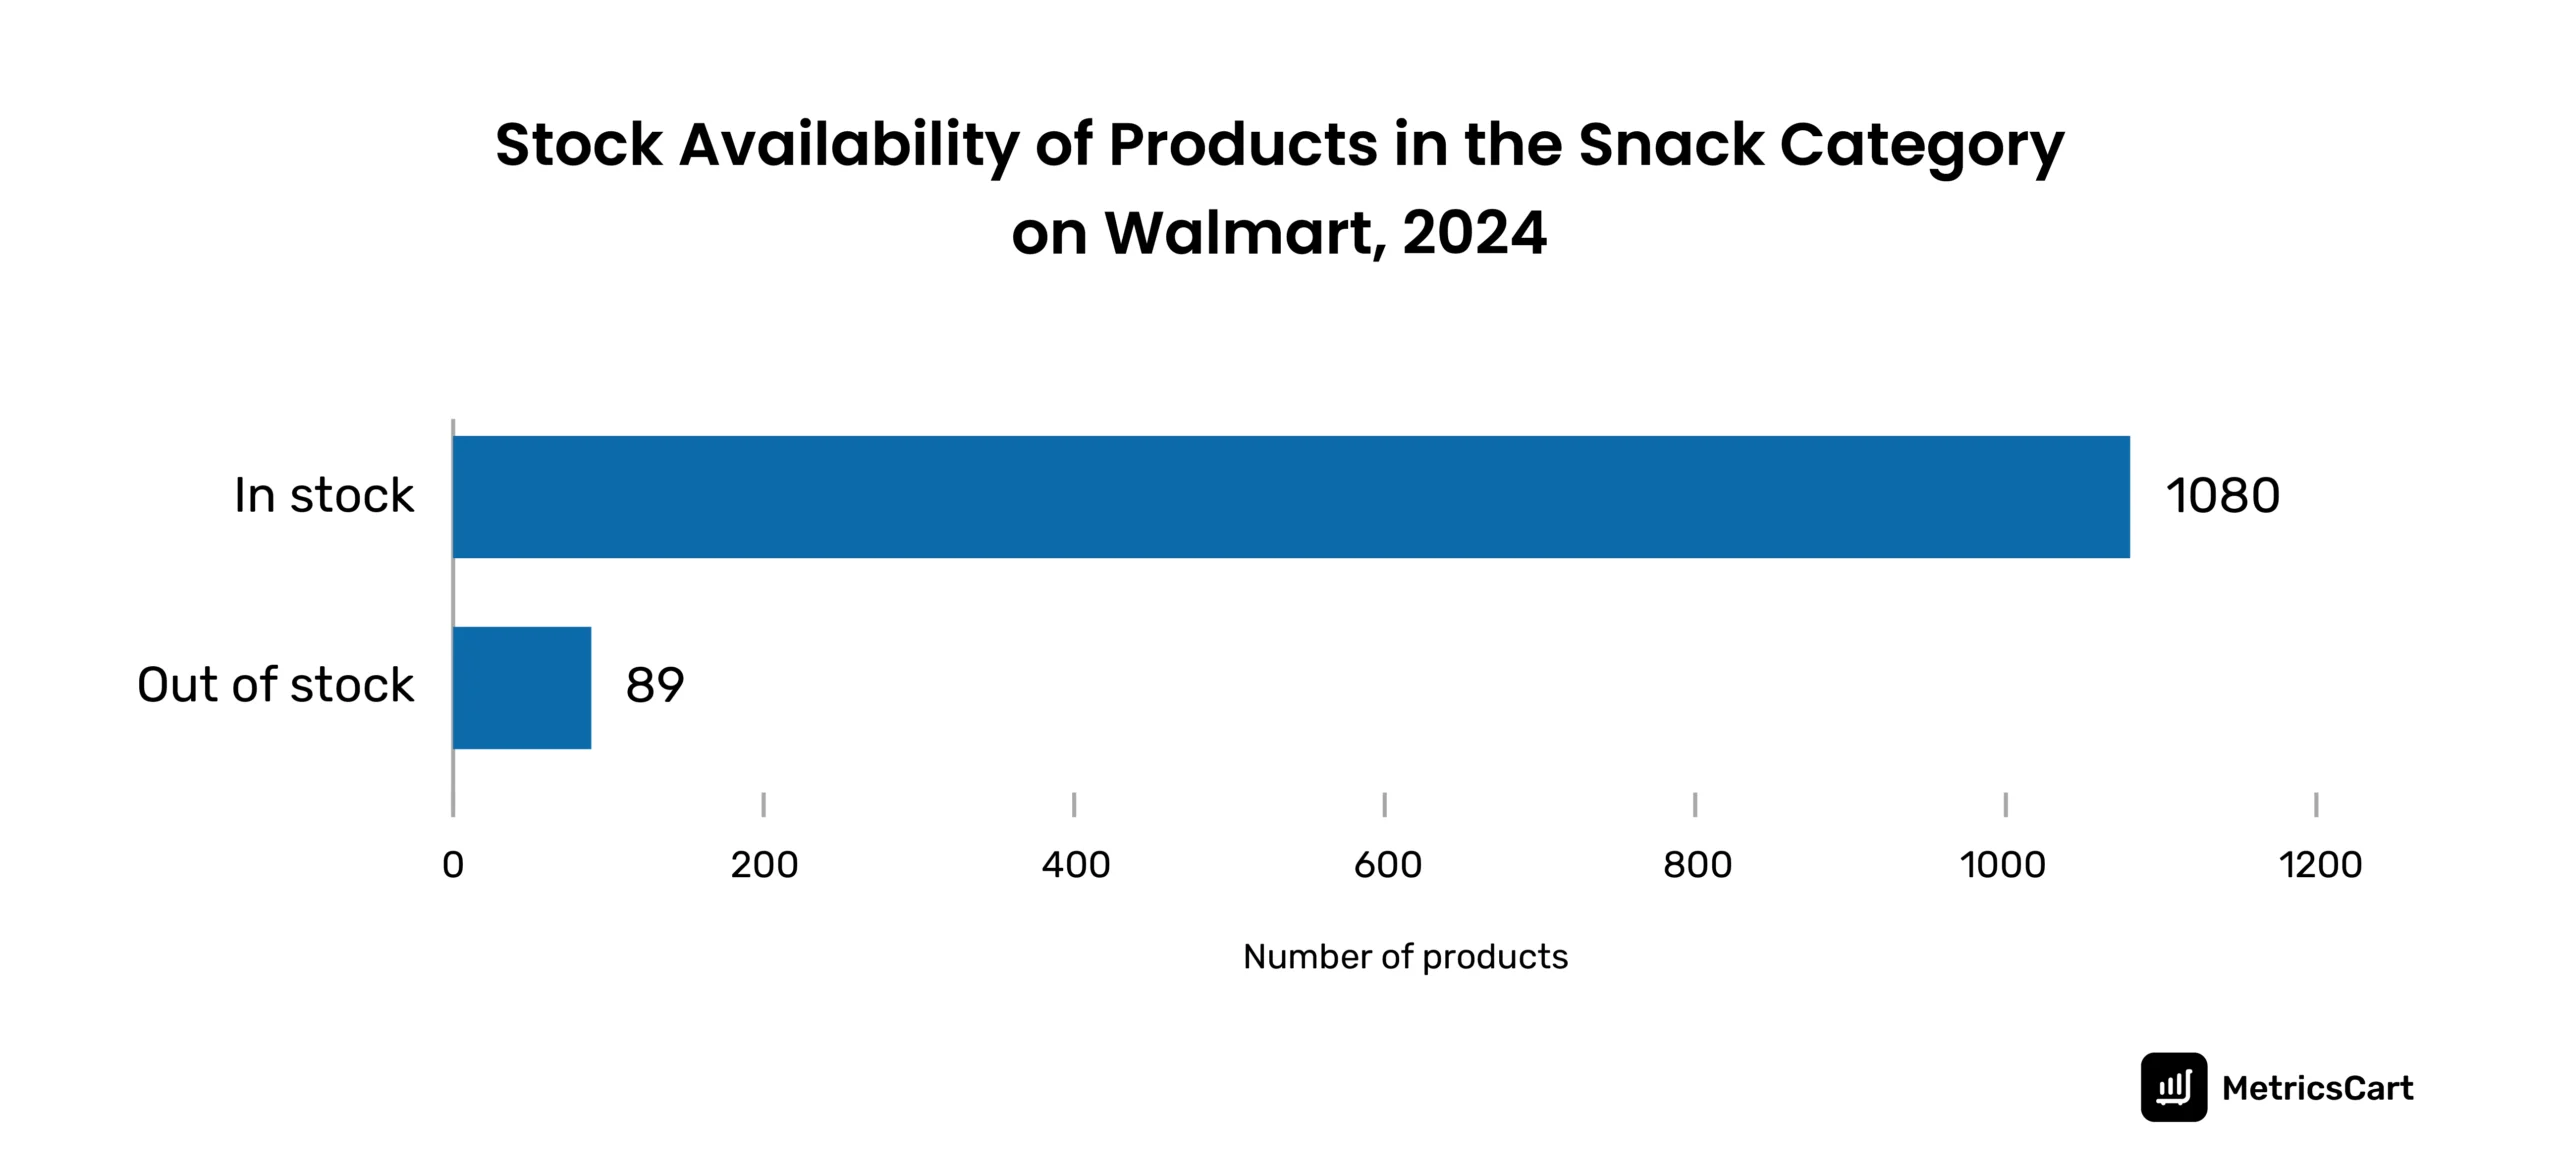 A chart displaying the total number of snack products in stock and out of stock at Walmart, 2024.